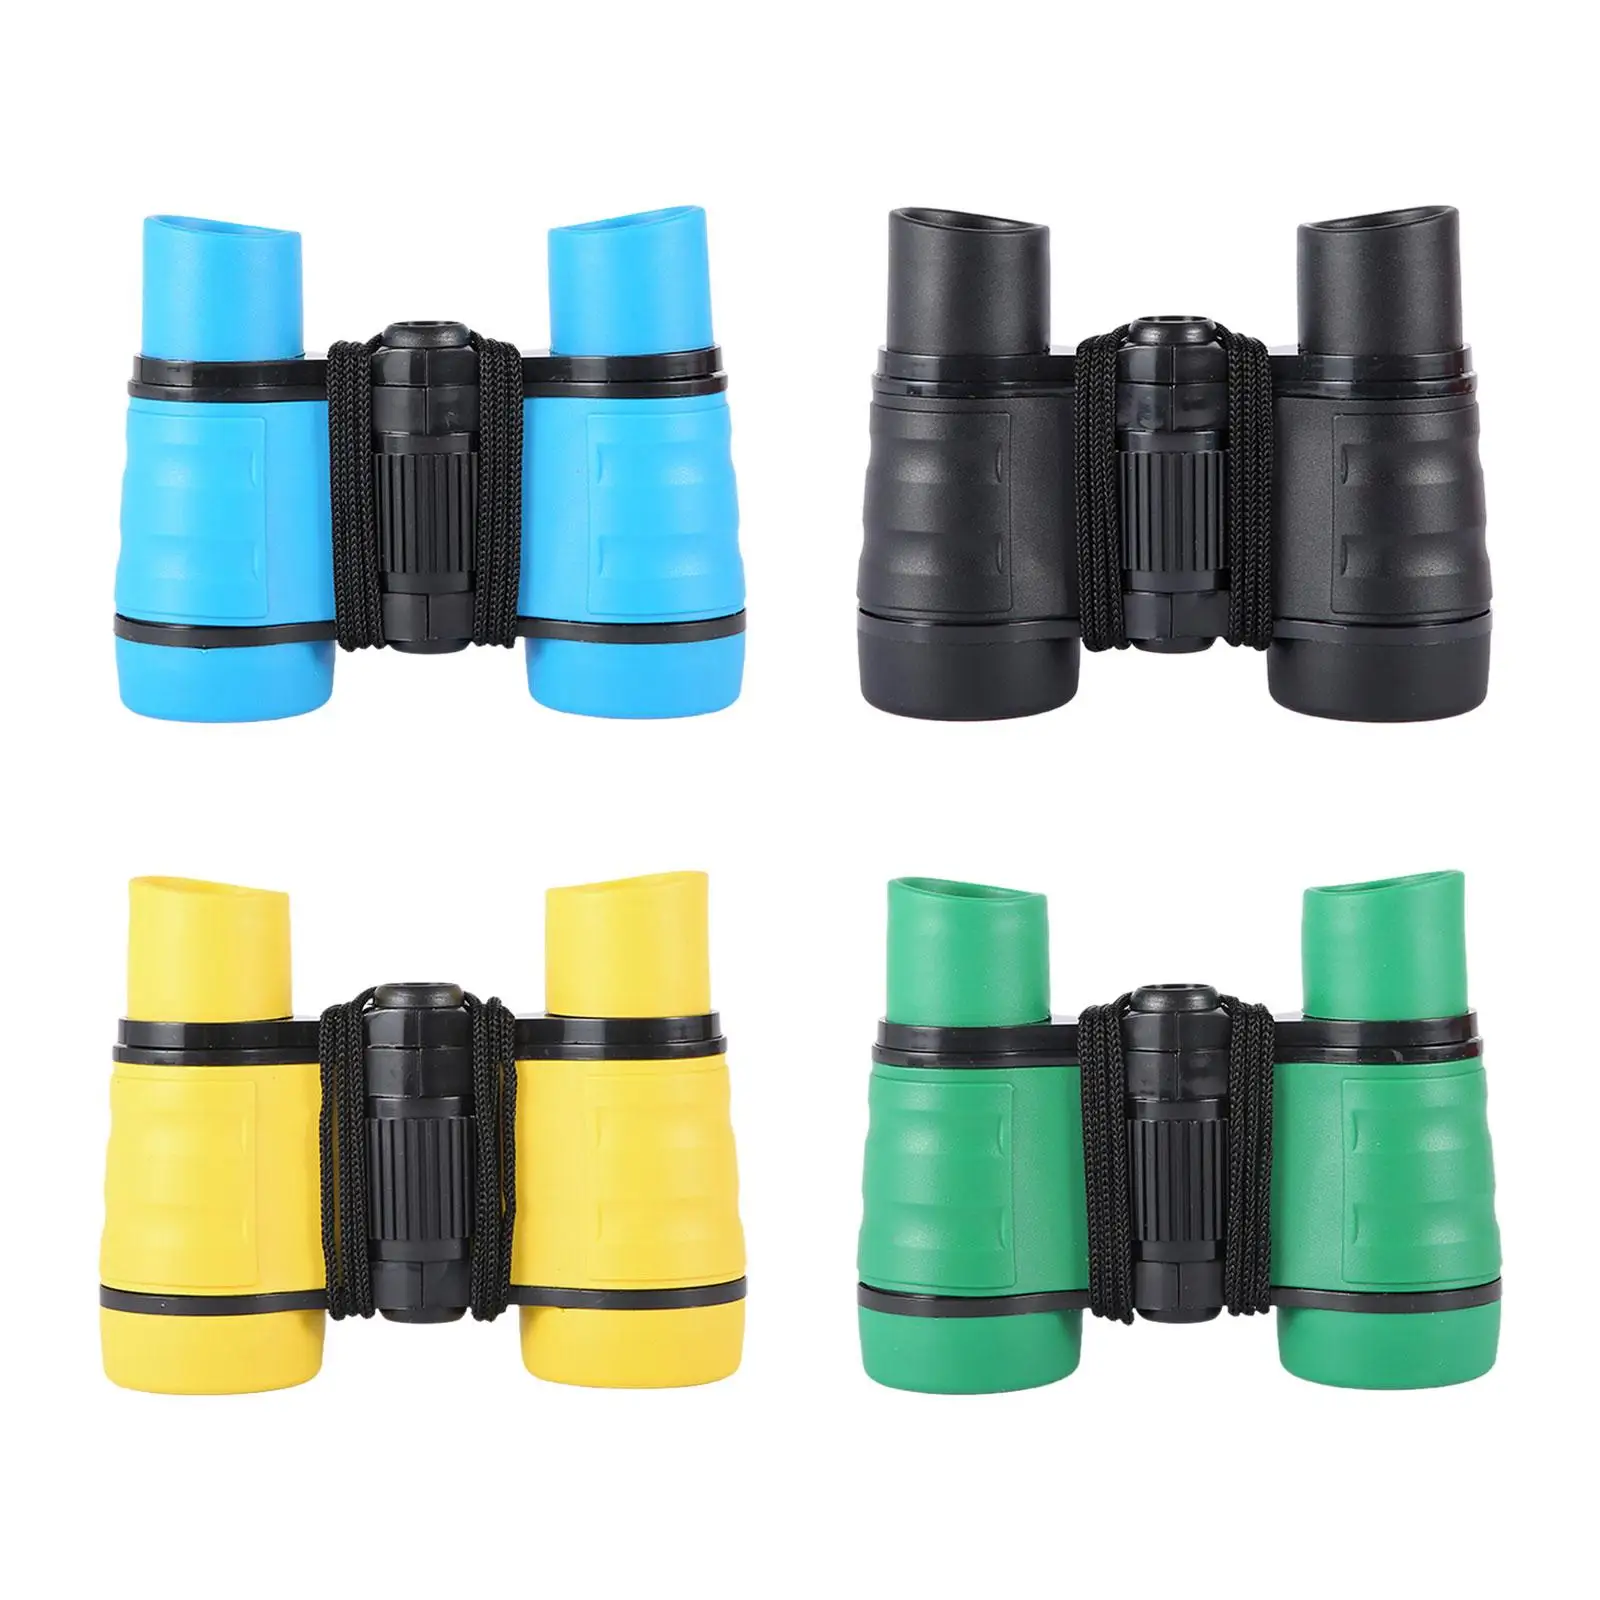 Kids Binoculars Toy Children Magnification Toy 4x30 Educational Bird Watching Telescope for Camping Birthday Outdoor Activity